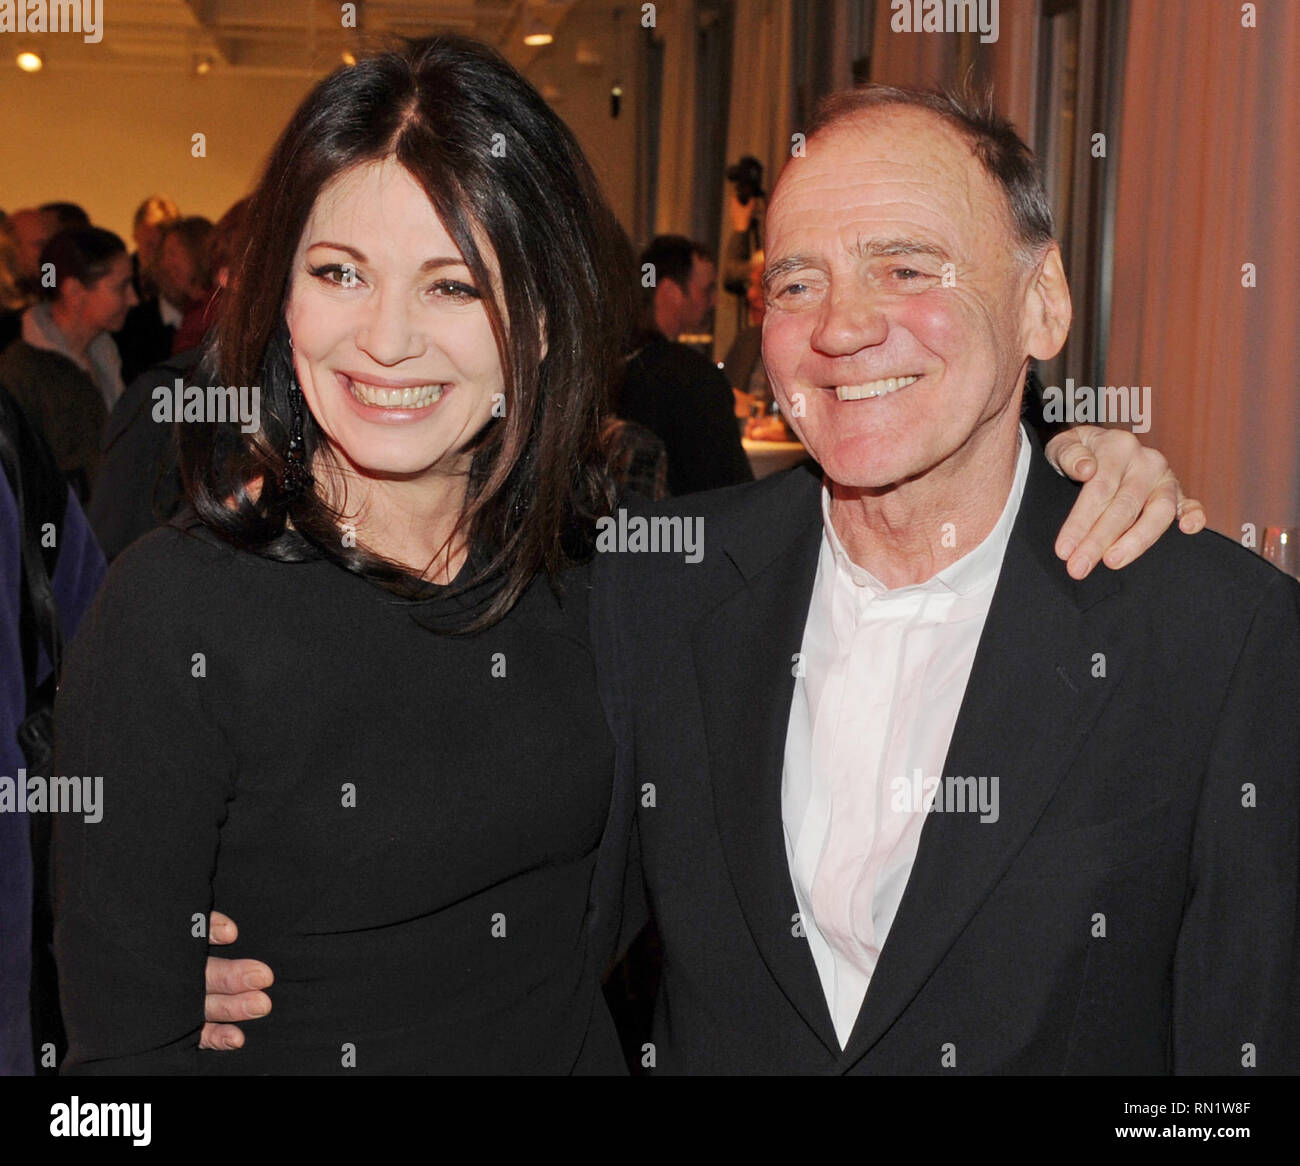 Berlin, Germany. 10th Feb, 2012. German actresss Iris Berben and Swiss actor Bruno Ganz attend the reception for the new section German Cinema 'LOLA@berlinale' during the 62nd Berlin International Film Festival, in Berlin, Germany, 10 February 2012. The 62nd Berlinale takes place from 09 to 19 February. Credit: Jens Kalaene dpa | usage worldwide/dpa/Alamy Live News Stock Photo